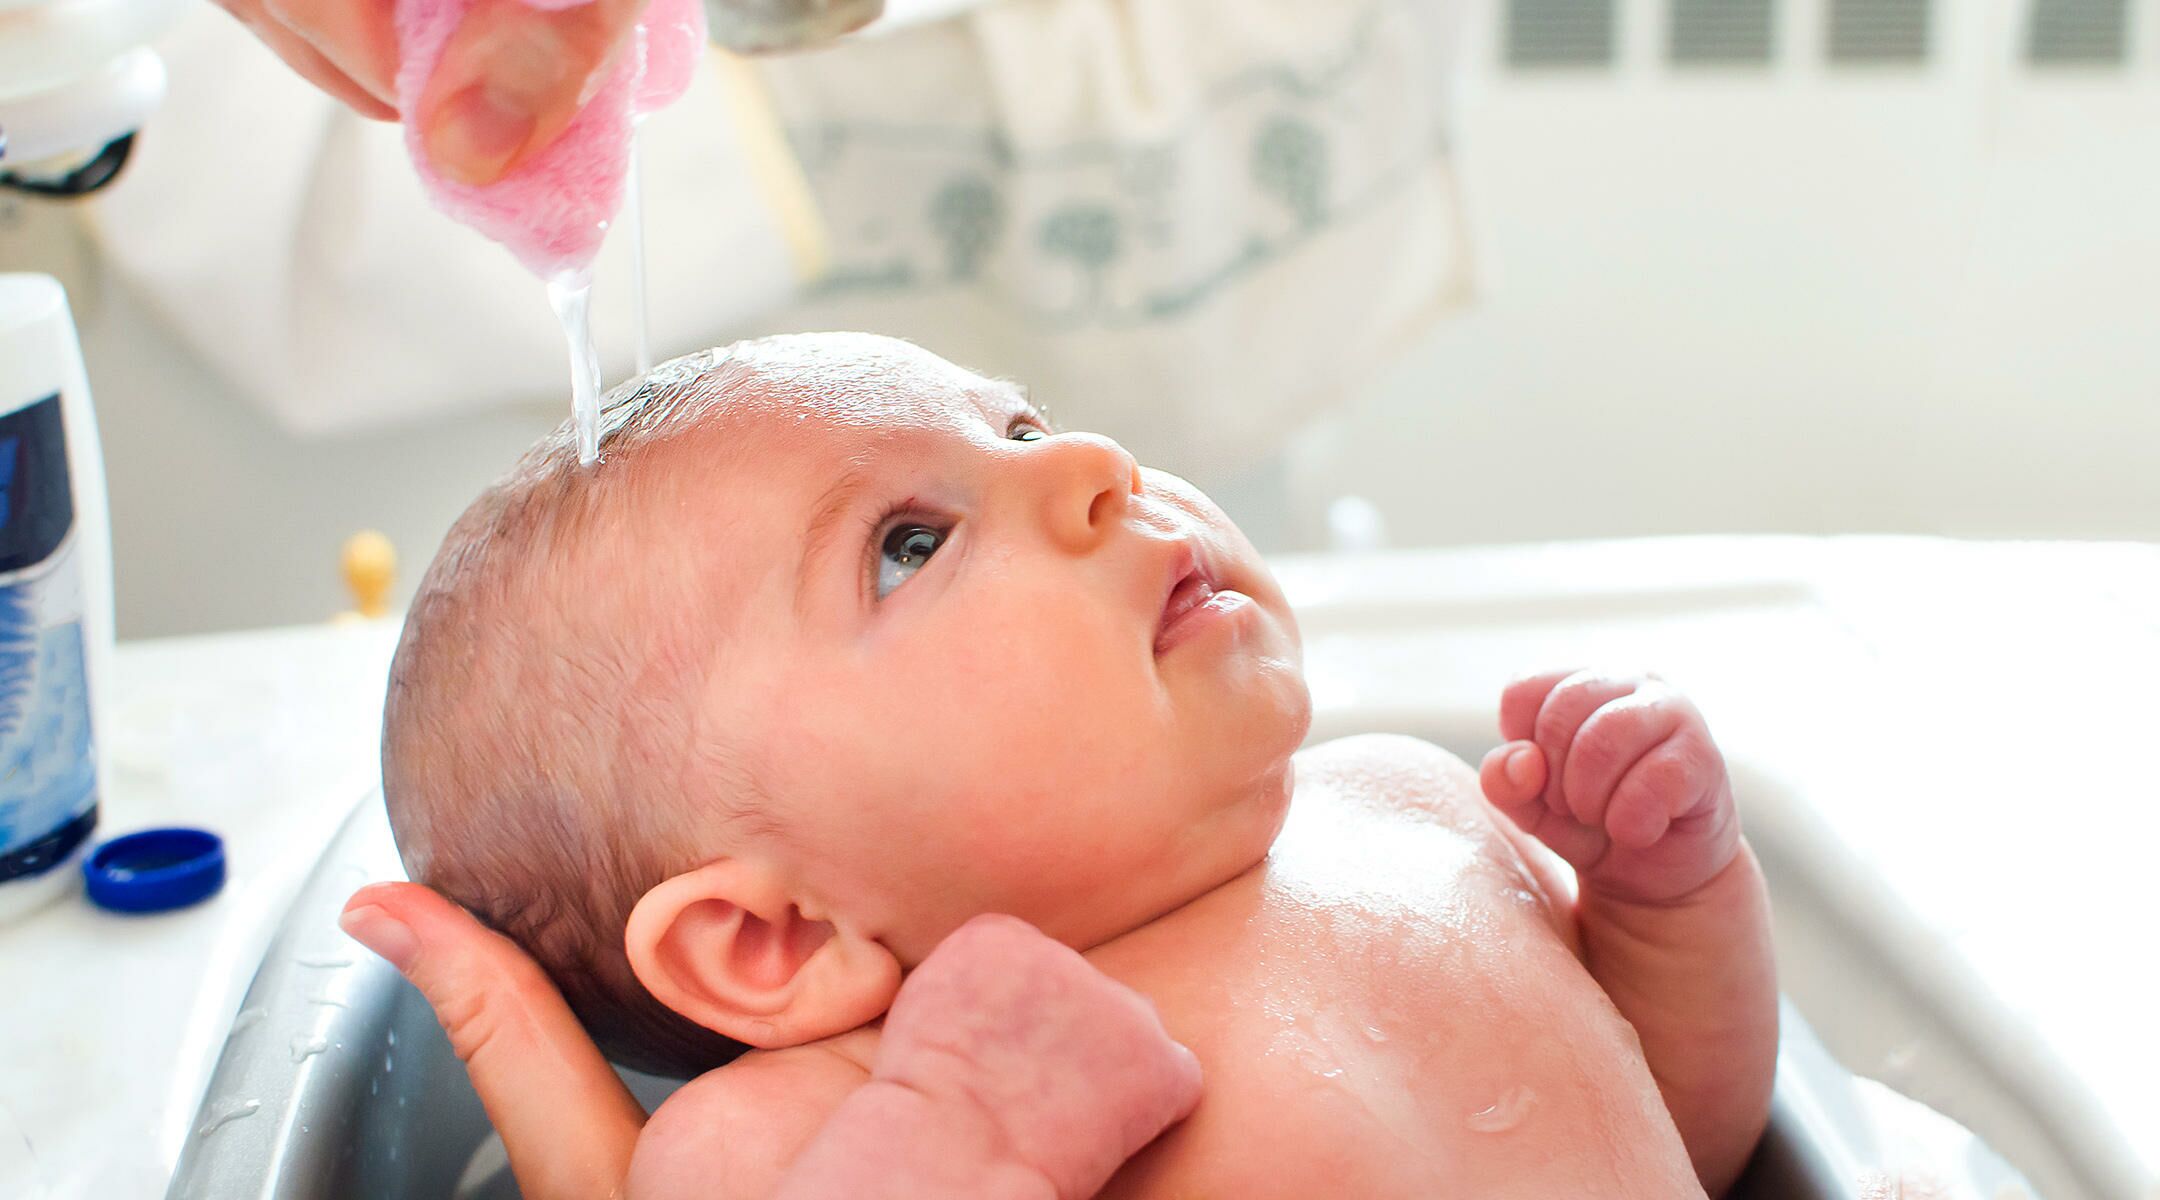 Baby Bath: How To Give Them Their First Bath